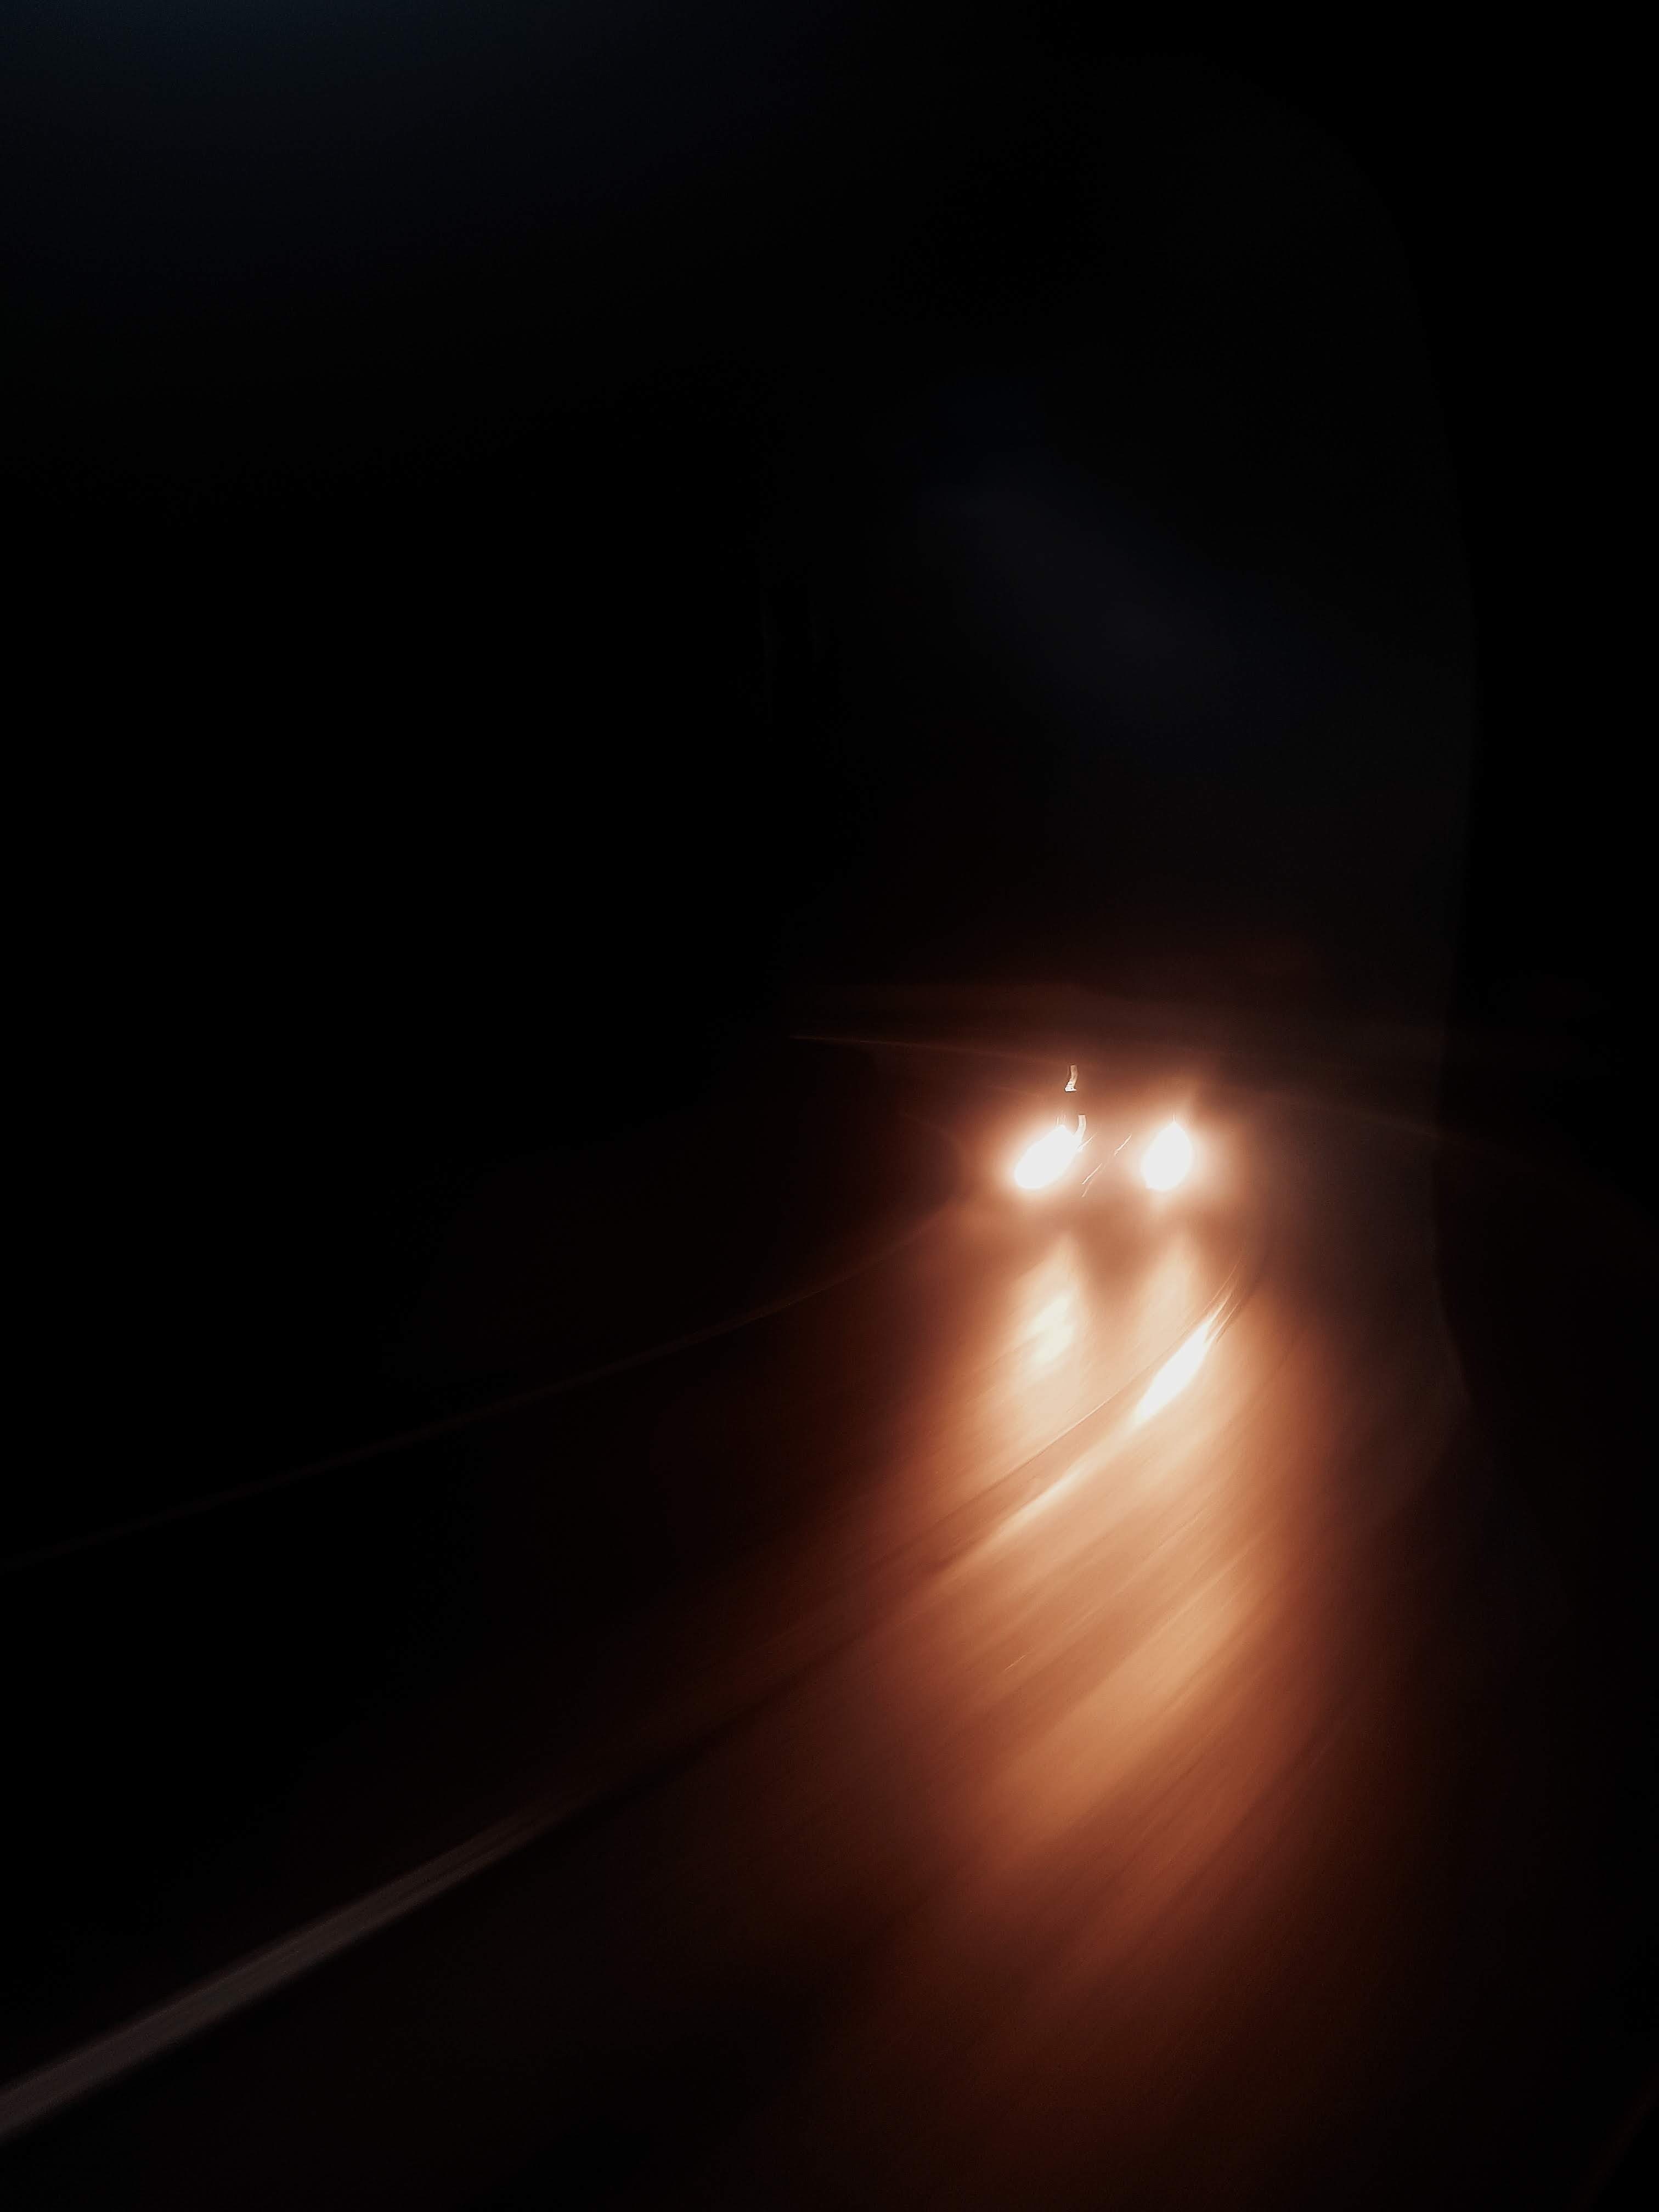 58853 download wallpaper headlights, night, lights, dark, shine, light, traffic, movement, blur, smooth screensavers and pictures for free